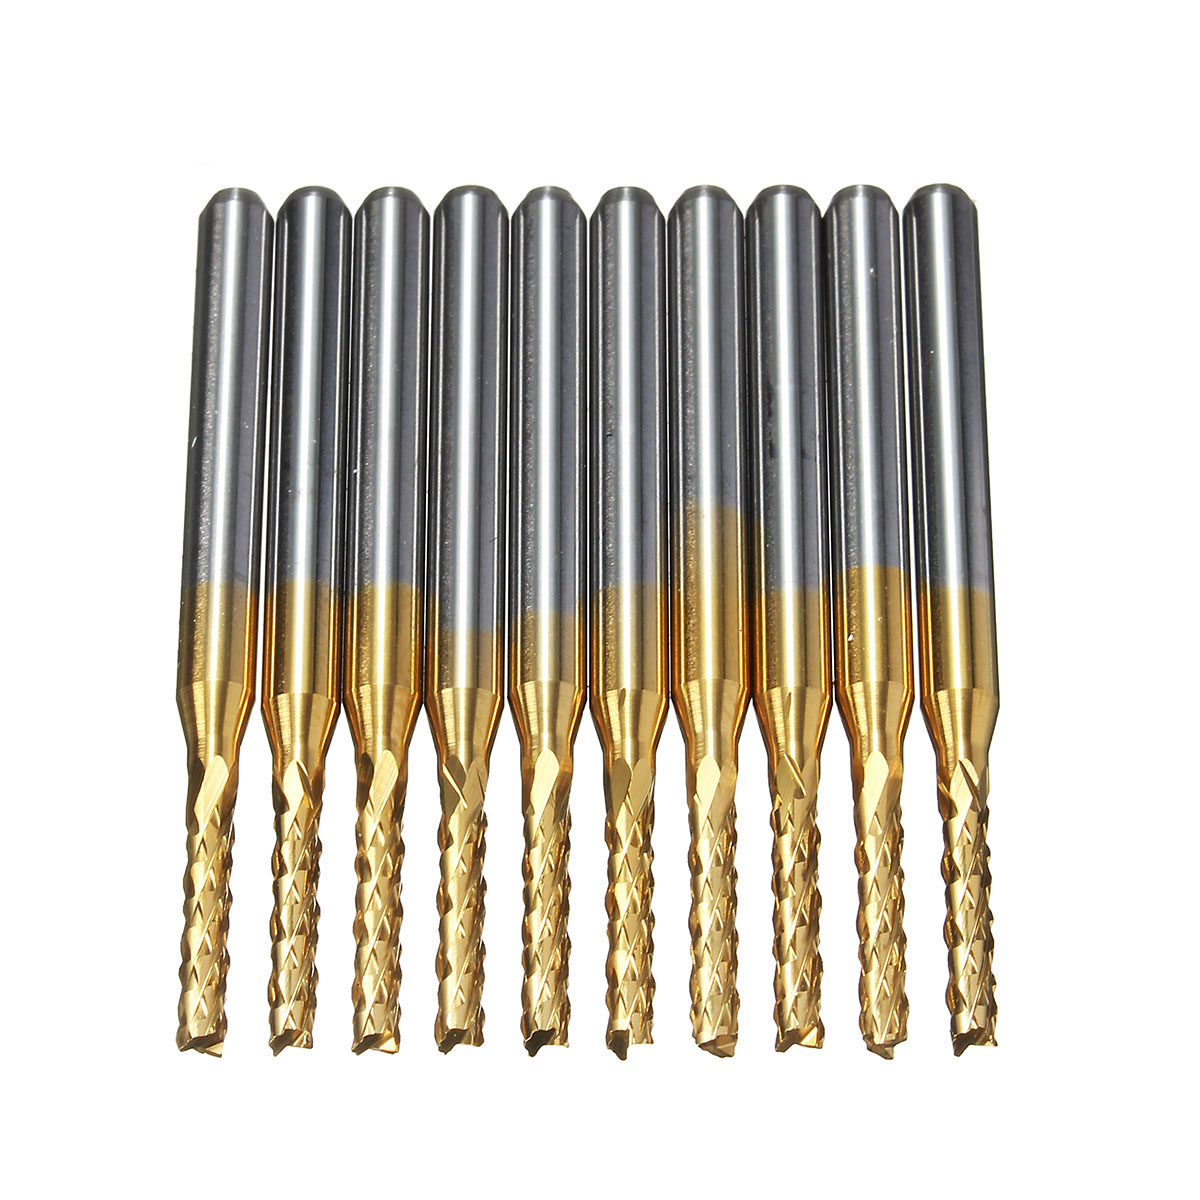 

10pcs 1.5mm Tips 1/8 Inch Shank Carbide End Mill Engraving Bits for CNC PCB Rotary Burrs